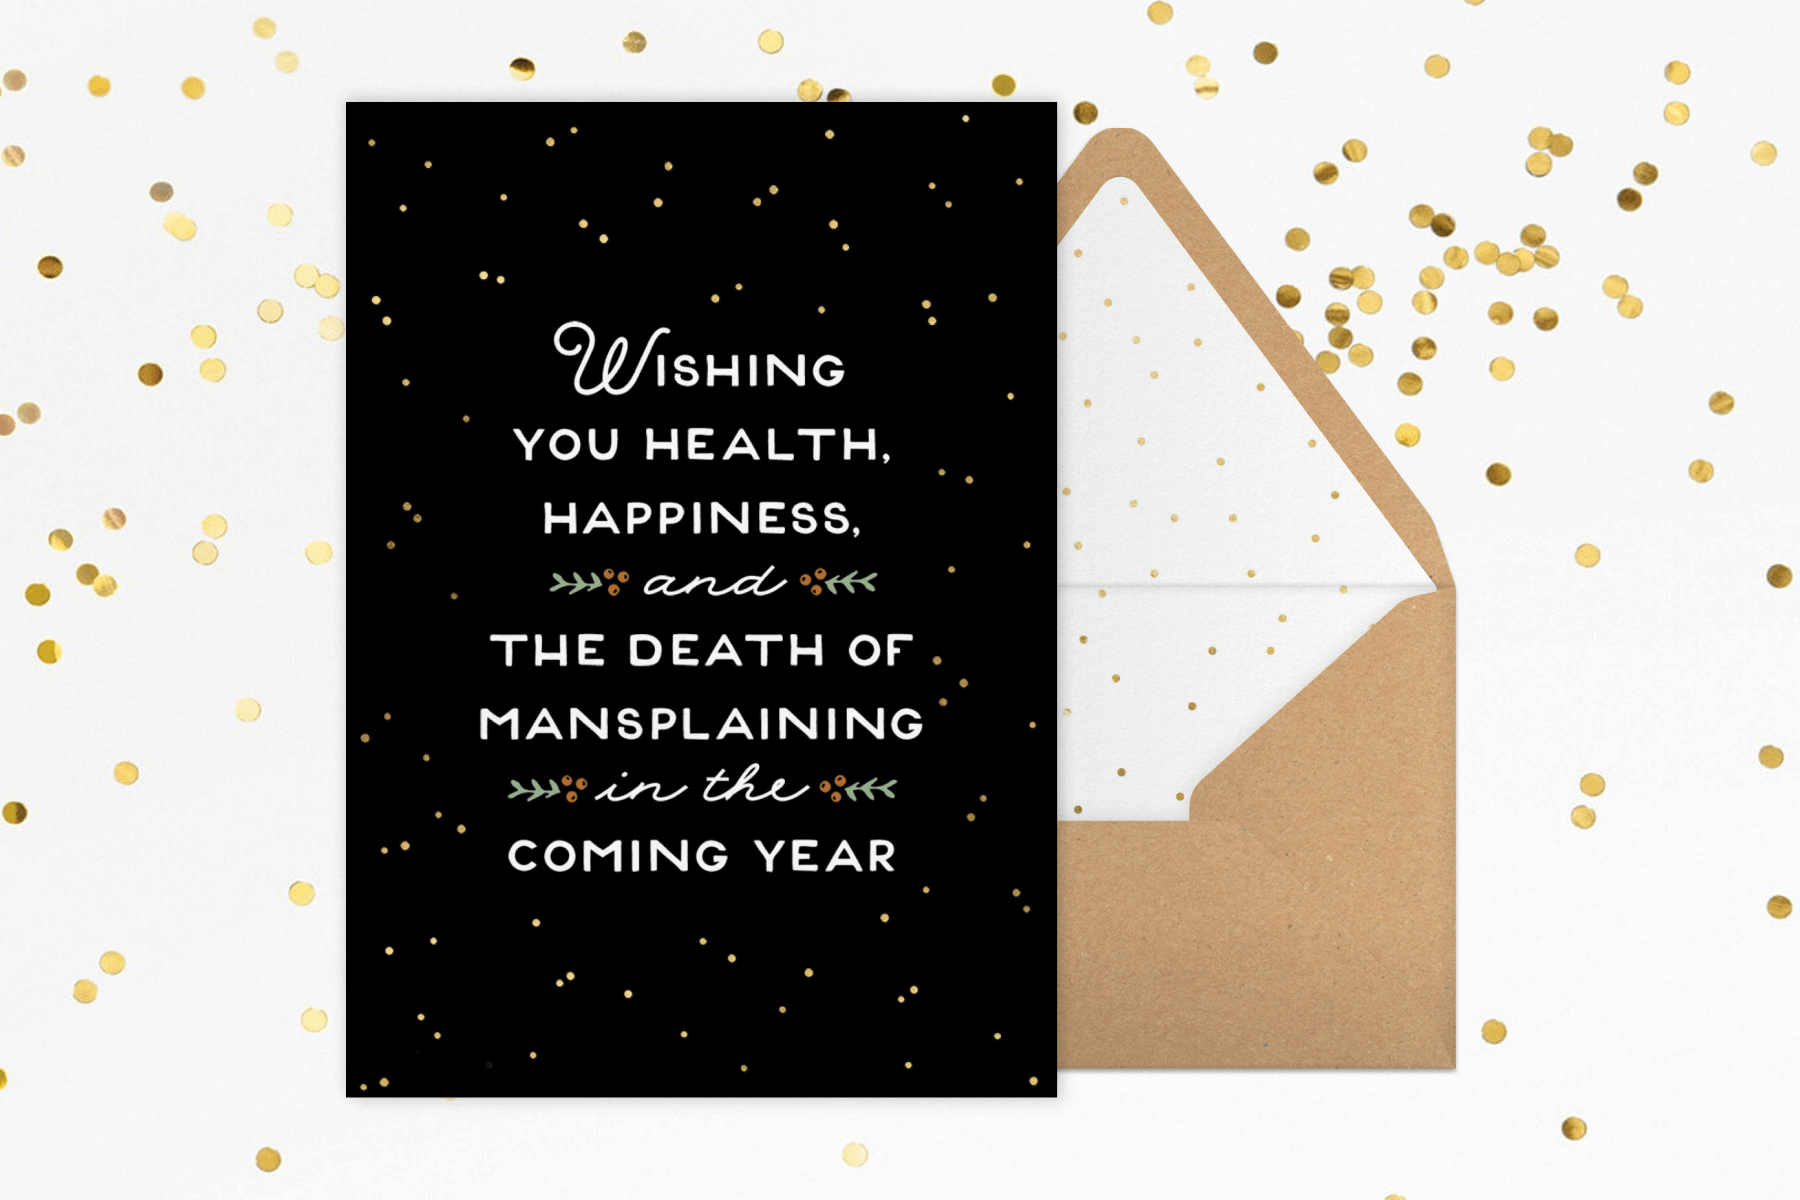 A black card with the words "Wishing you health, happiness, and the death of mansplaining in the coming year."